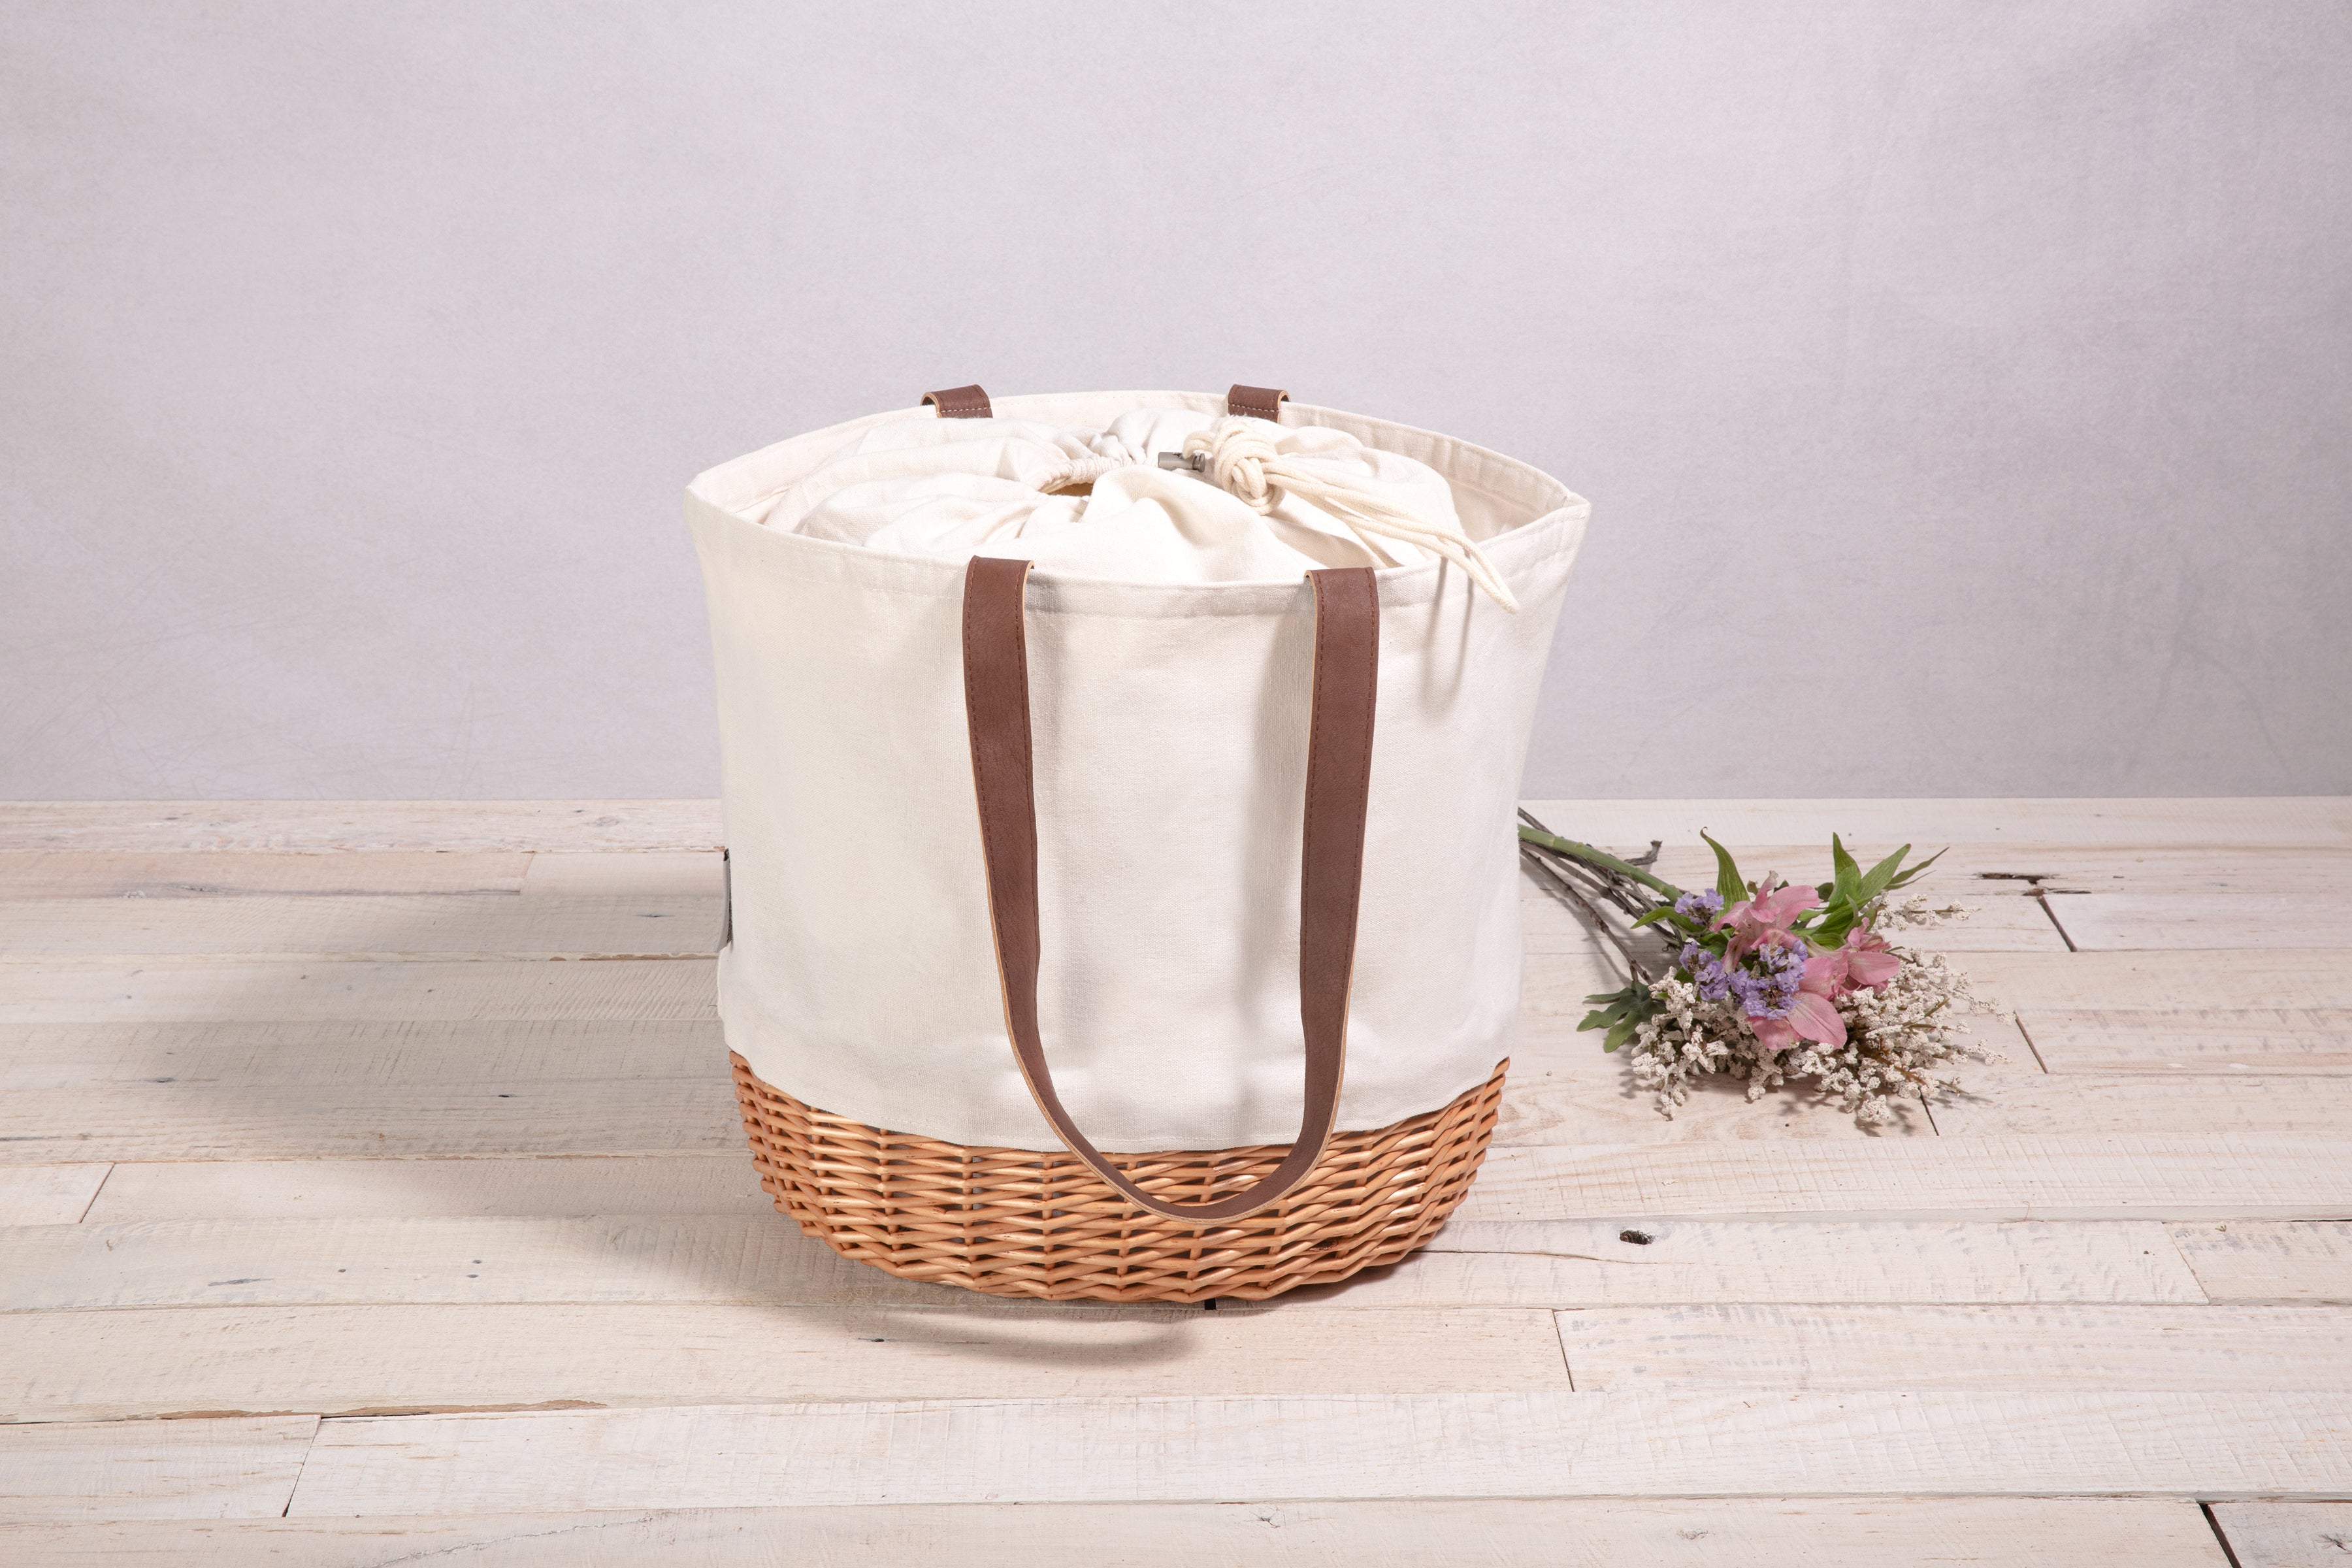 Tennessee Volunteers - Coronado Canvas and Willow Basket Tote